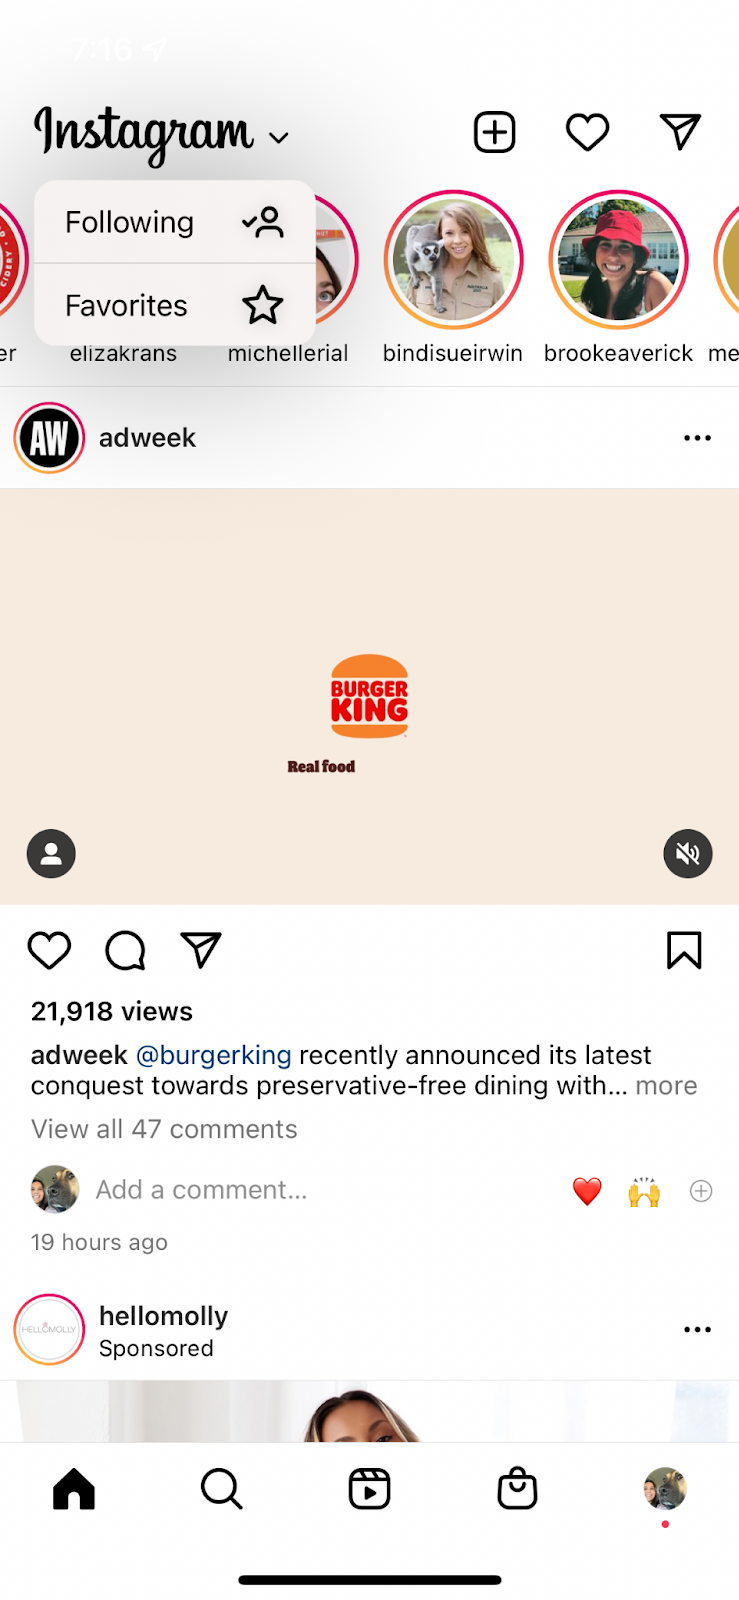 Image of Instagram interface depicting the location of the two additional feed options. 